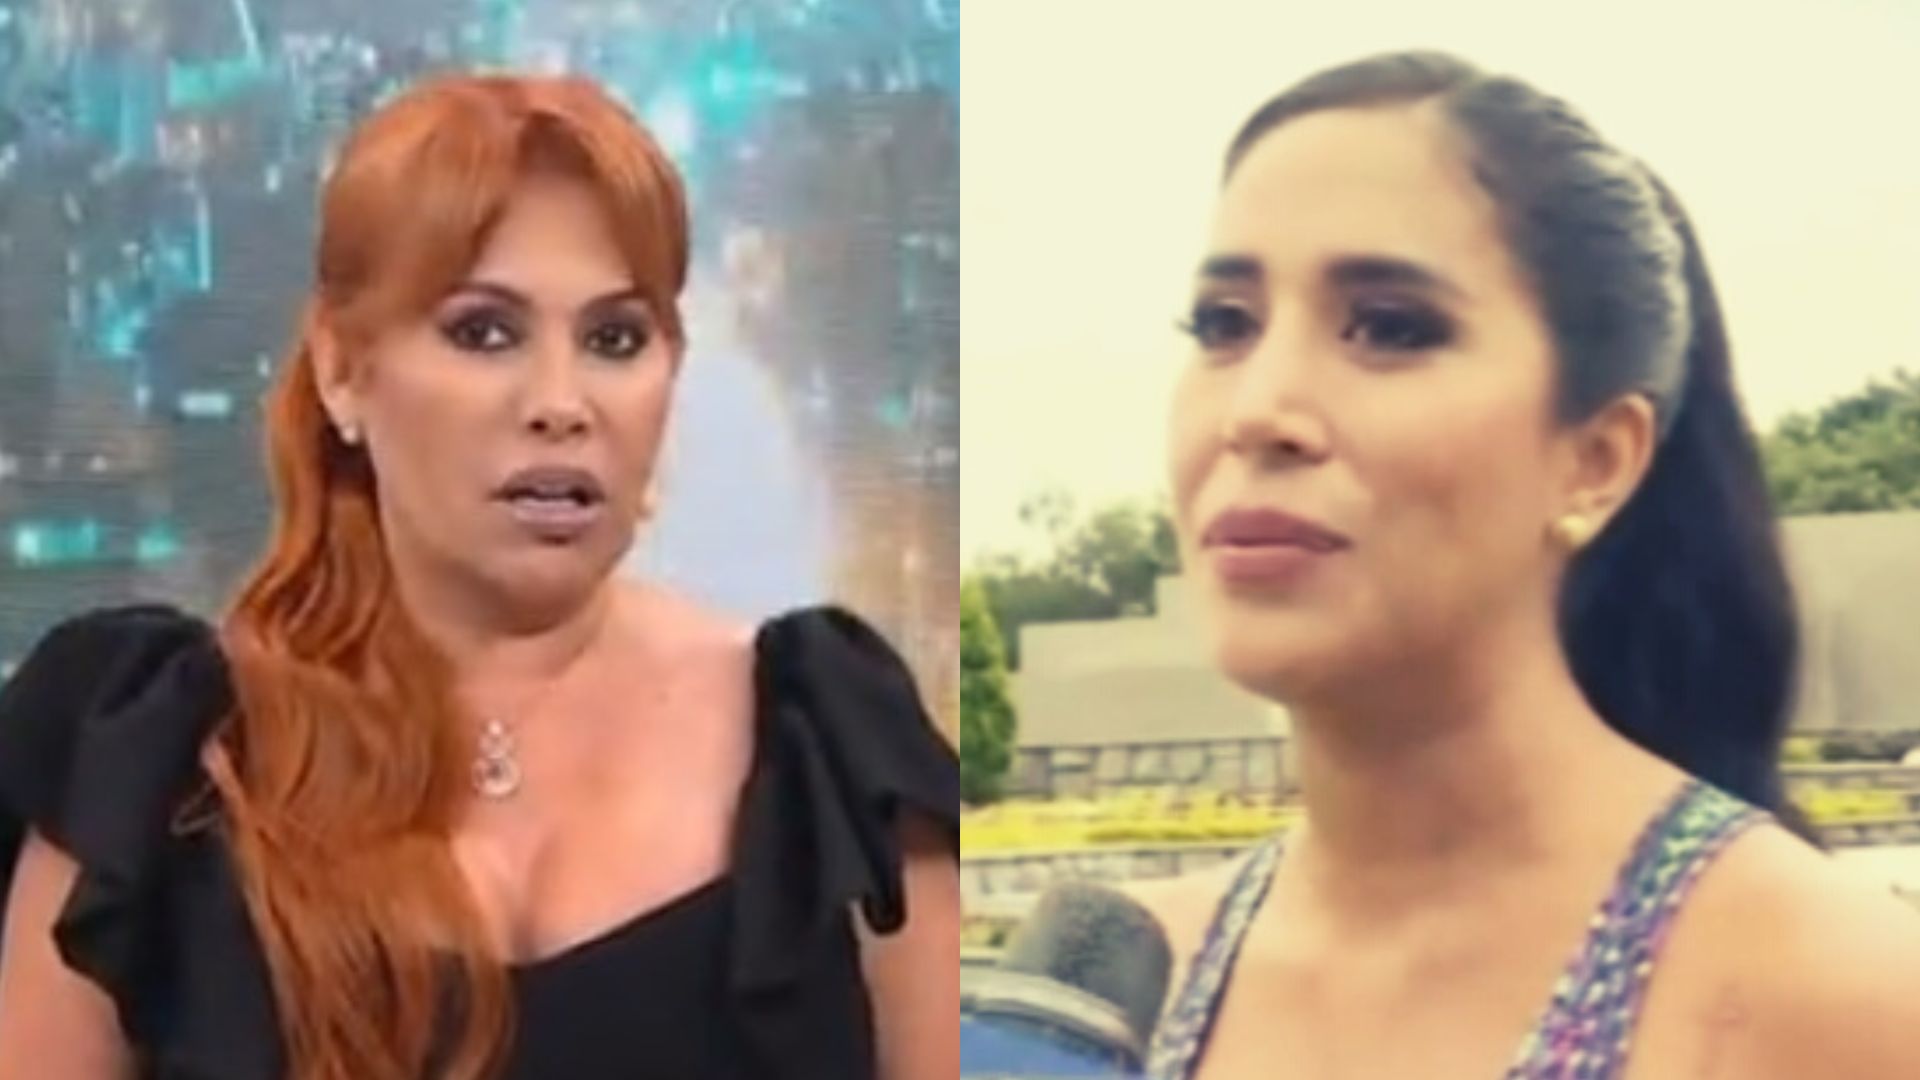 Magaly Medina criticized Melissa Paredes for inviting soccer players to Lunahuaná.